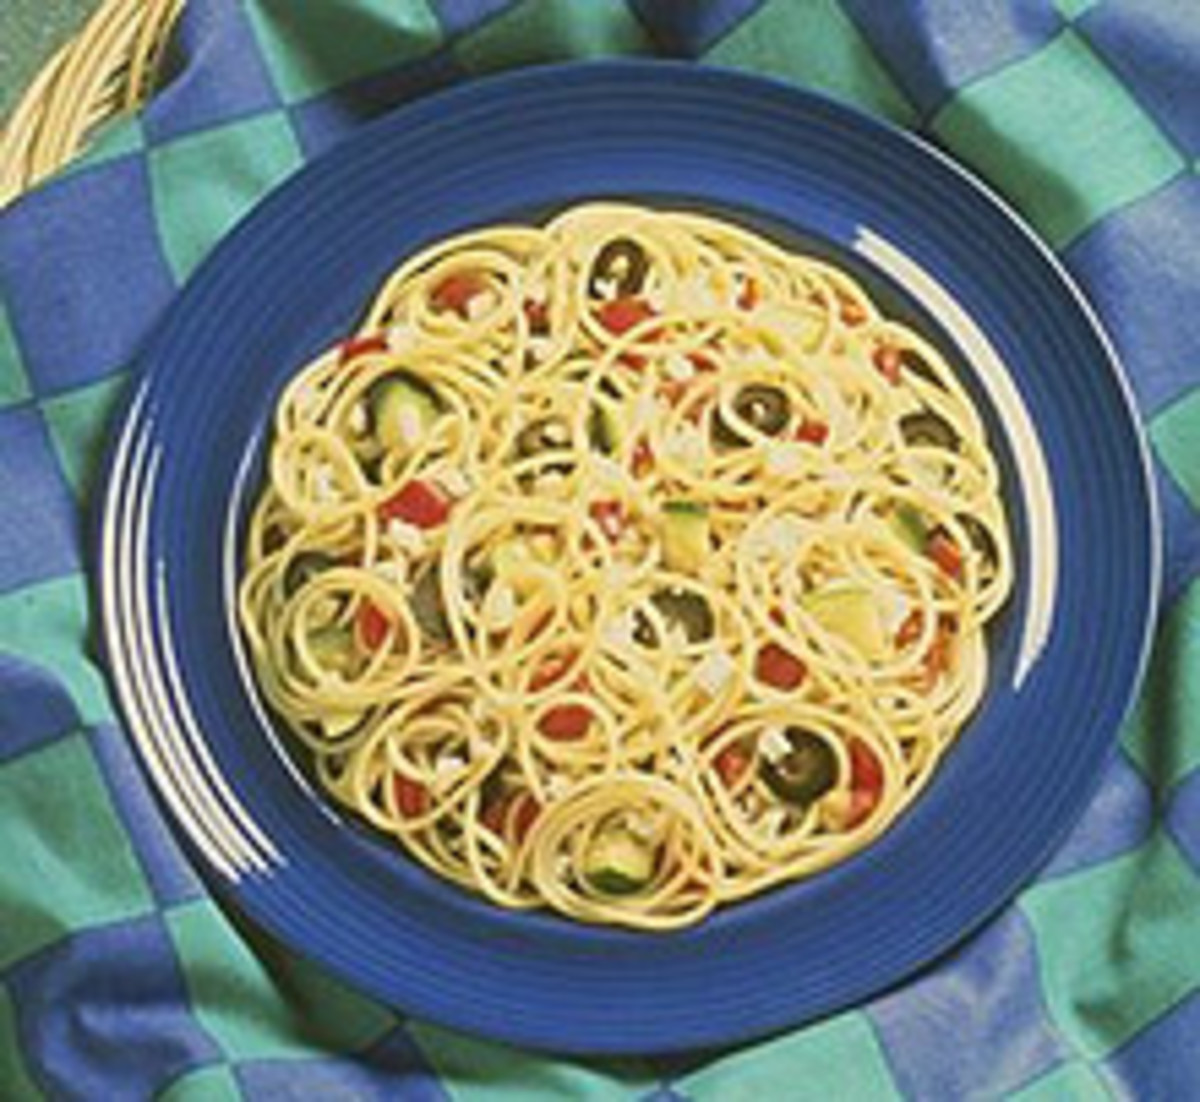 Spaghetti with Roasted Zucchini and Olives